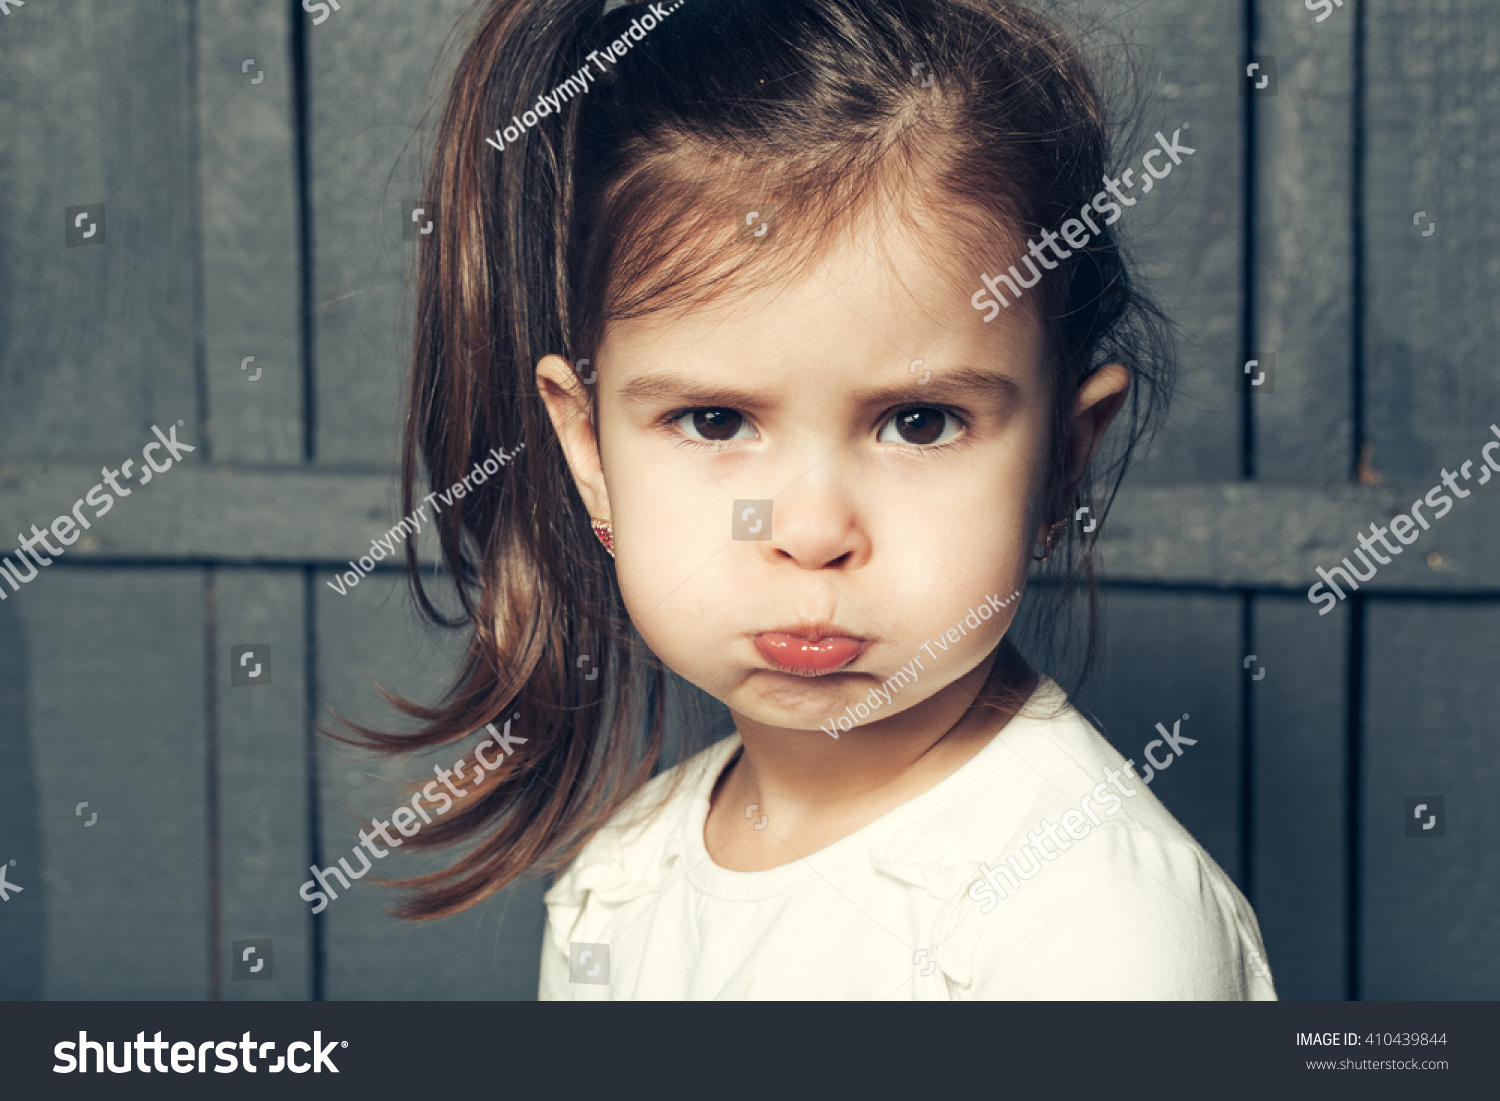 Little Girl Cute Face Funny Hairstyle Stock Image Download Now